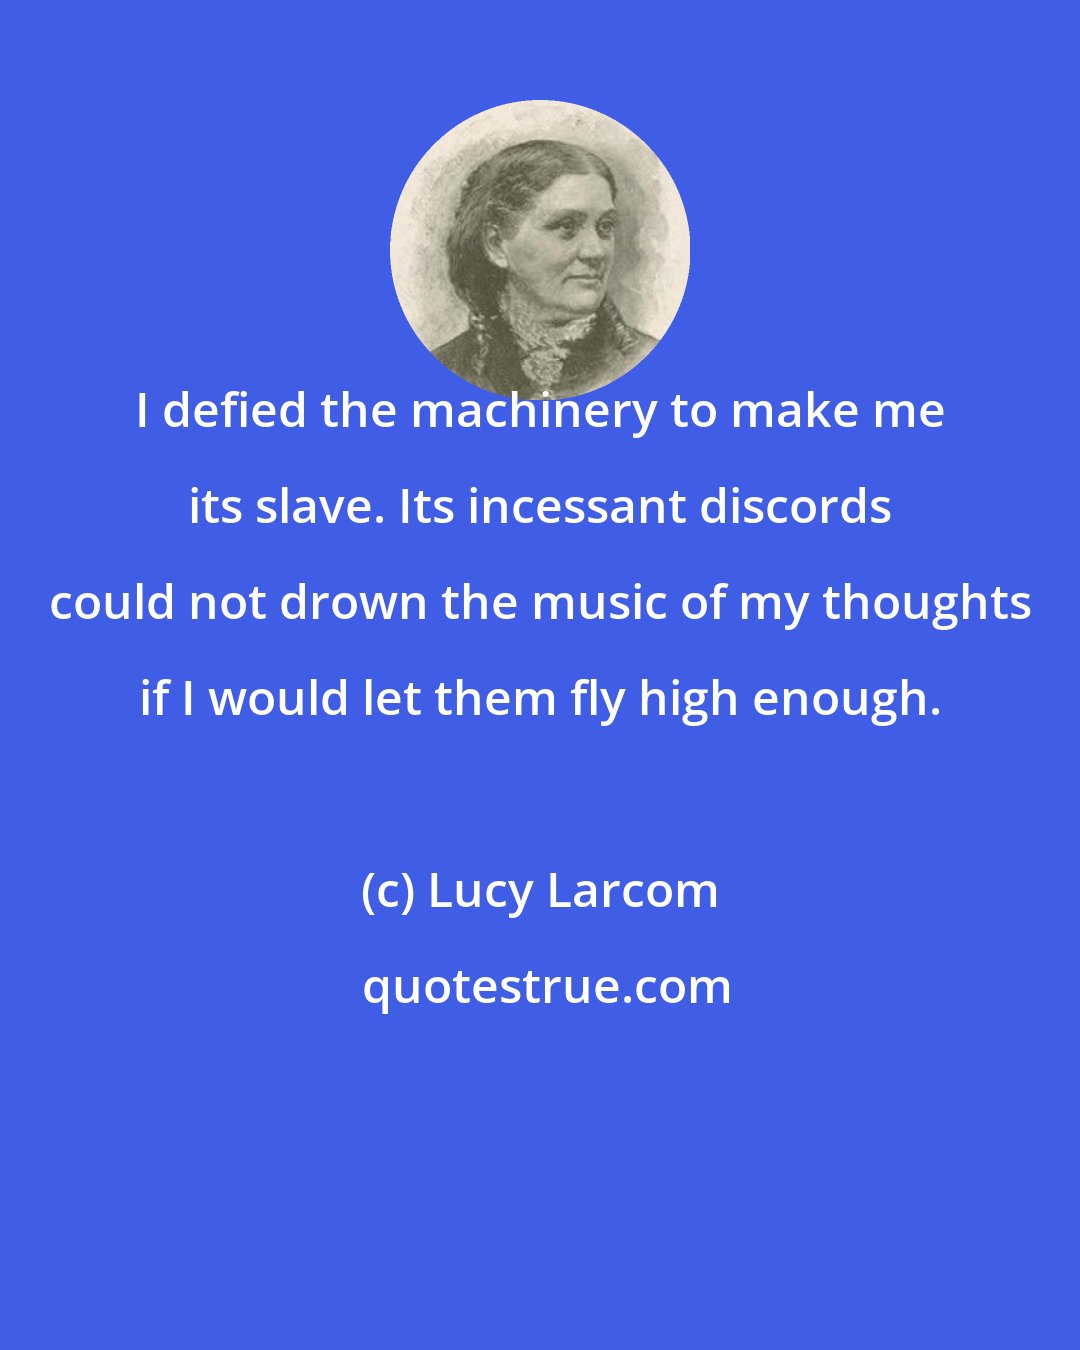 Lucy Larcom: I defied the machinery to make me its slave. Its incessant discords could not drown the music of my thoughts if I would let them fly high enough.